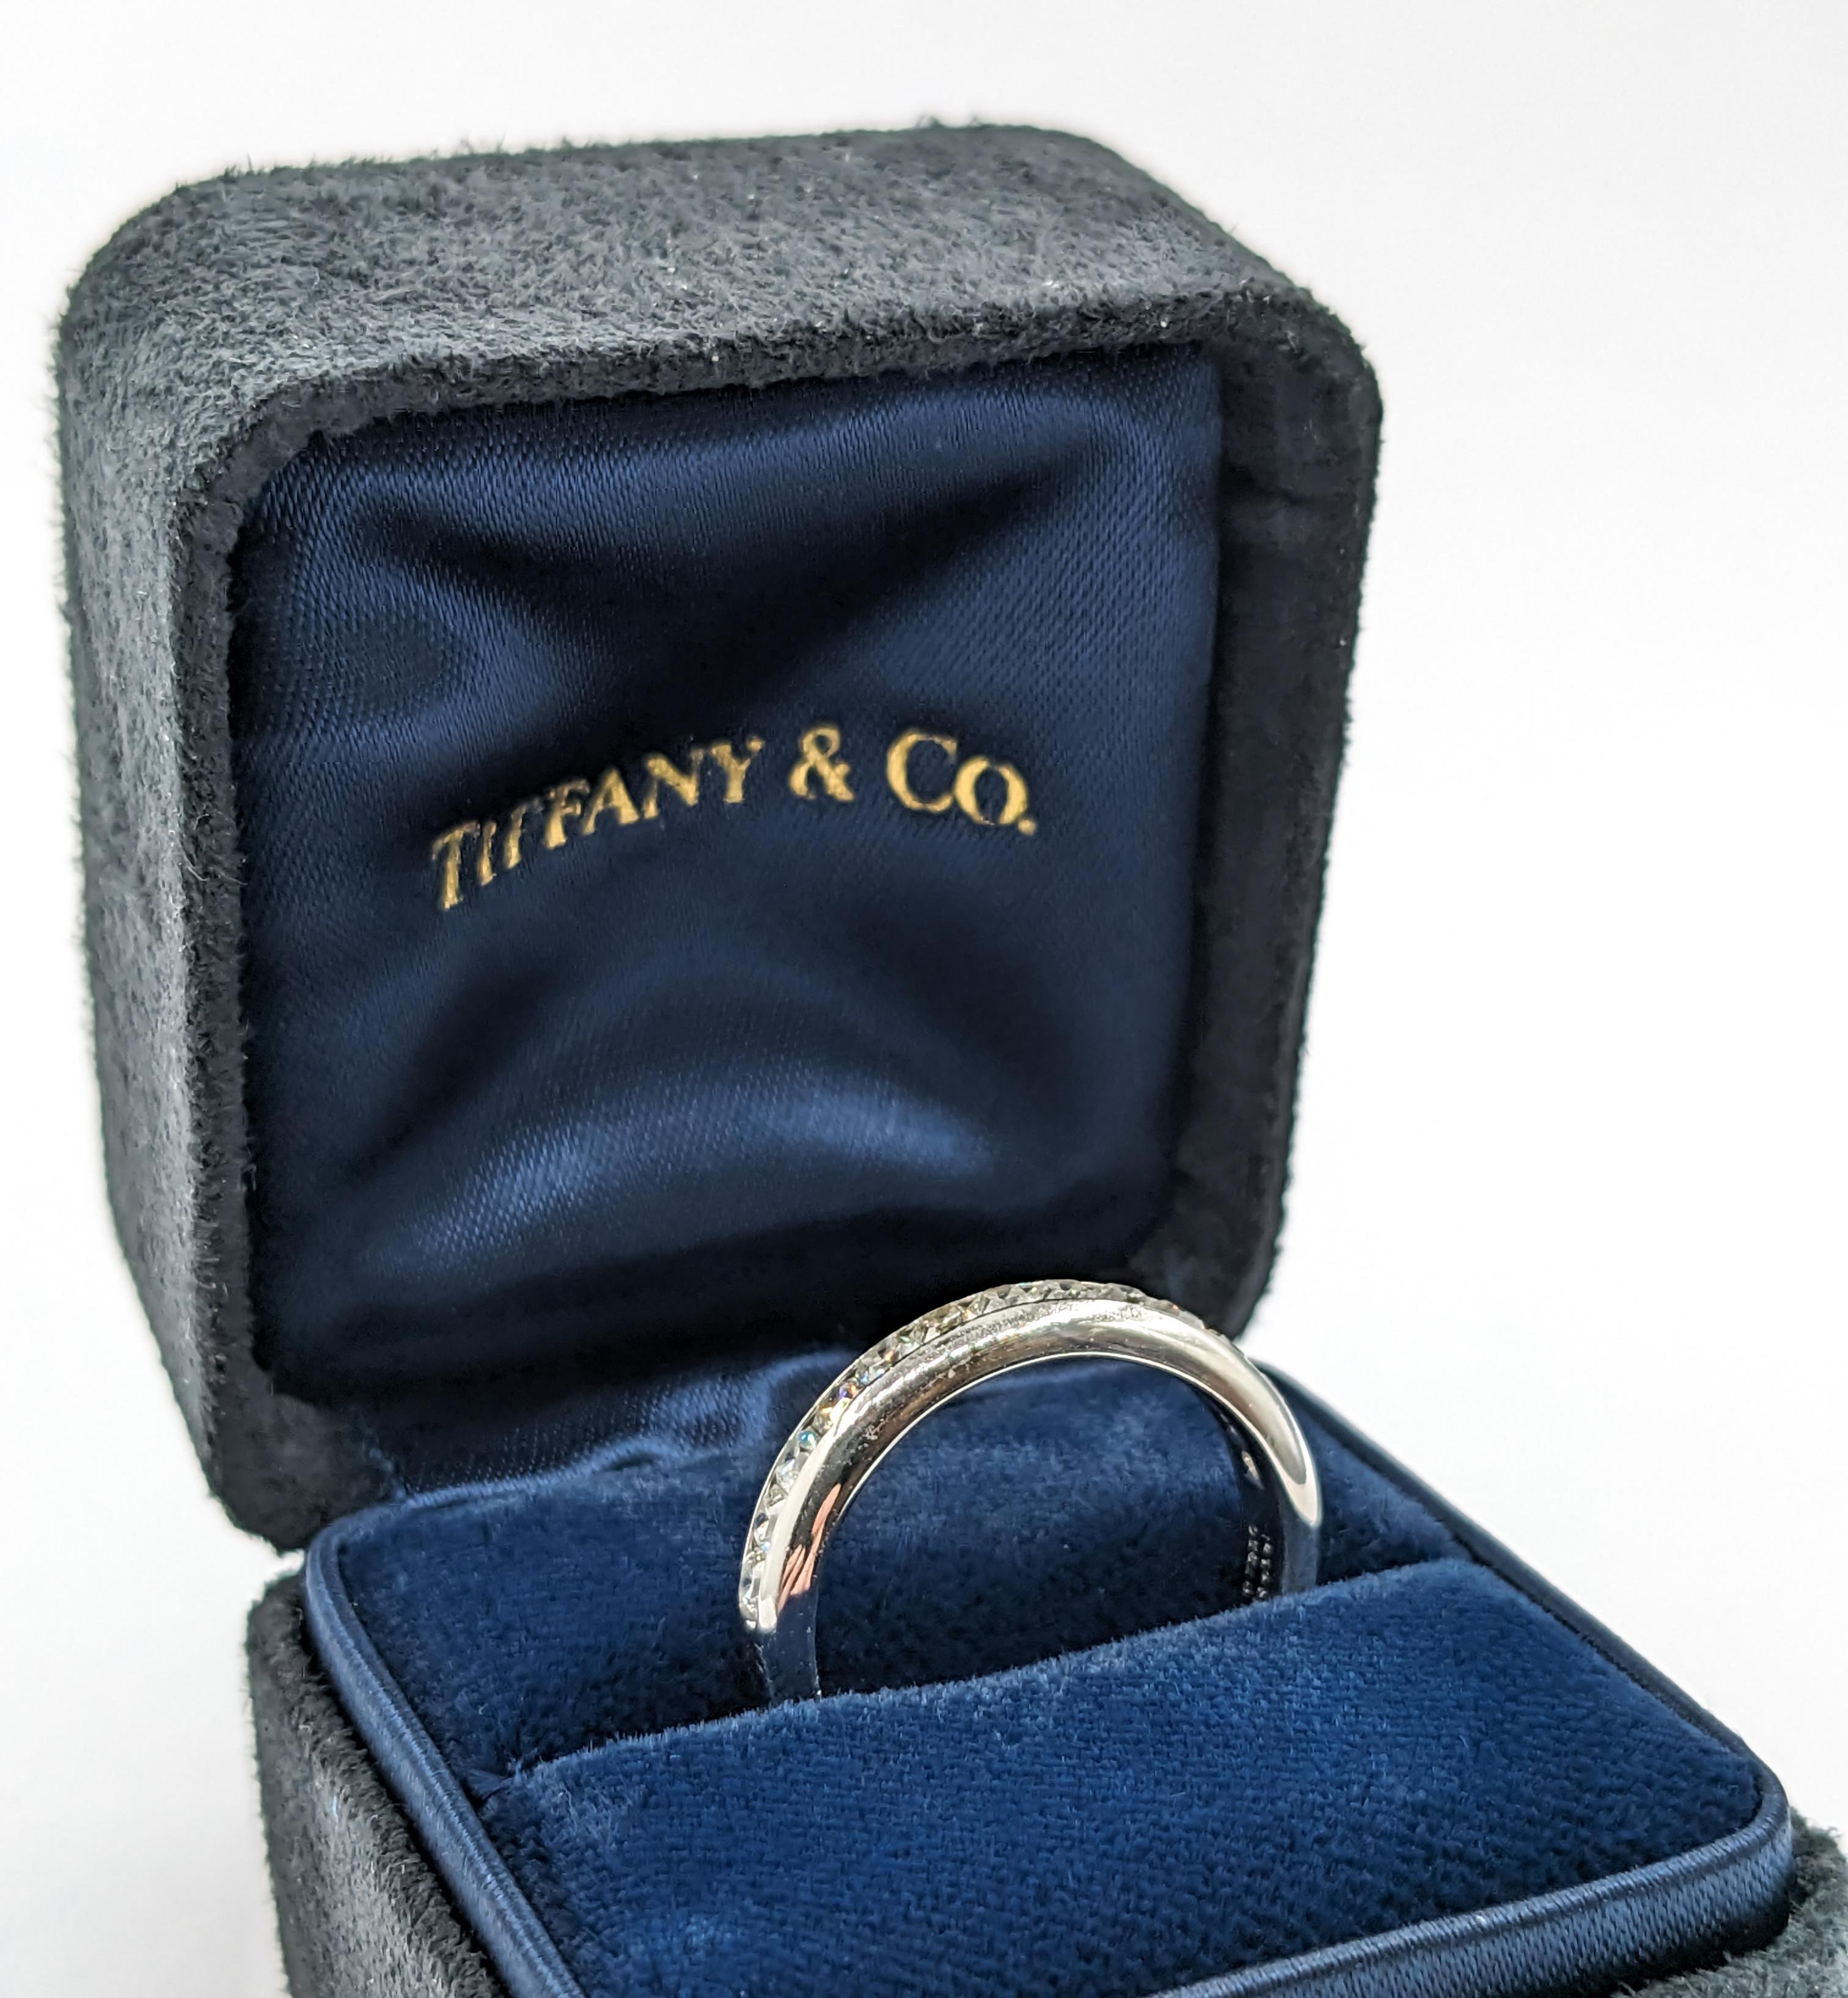 Tiffany & Co Lucida Diamond Channel Band Ring in Platinum 

Introducing our stunning authentic Tiffany & Co band ring, a masterpiece crafted with the utmost precision in premium platinum. This exquisite ring is adorned with 1.00ctw of radiant Lucida